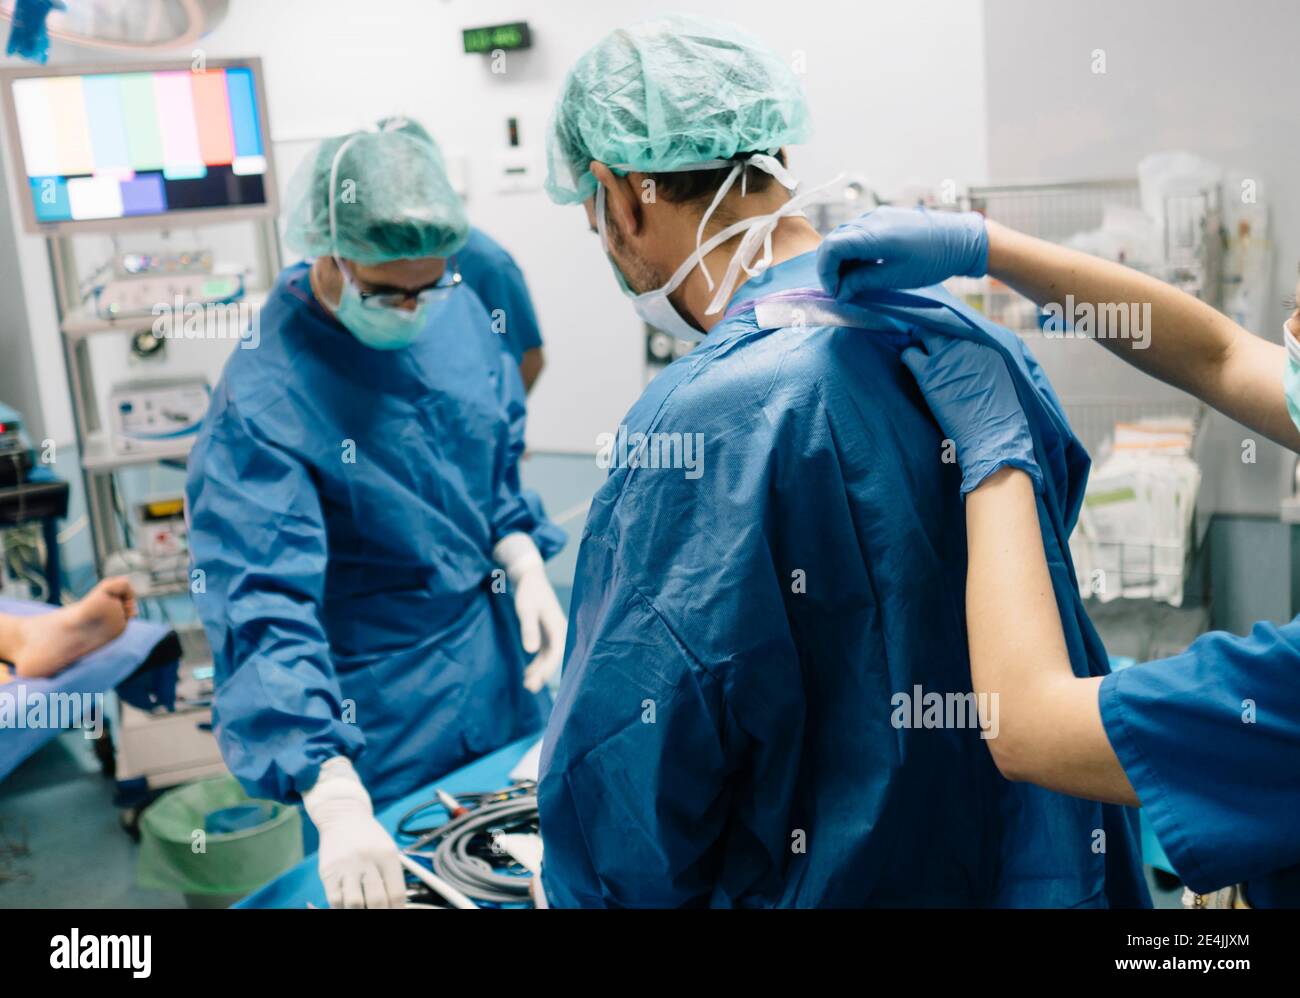 Male surgeons operating knee surgery in emergency room at hospital Stock Photo